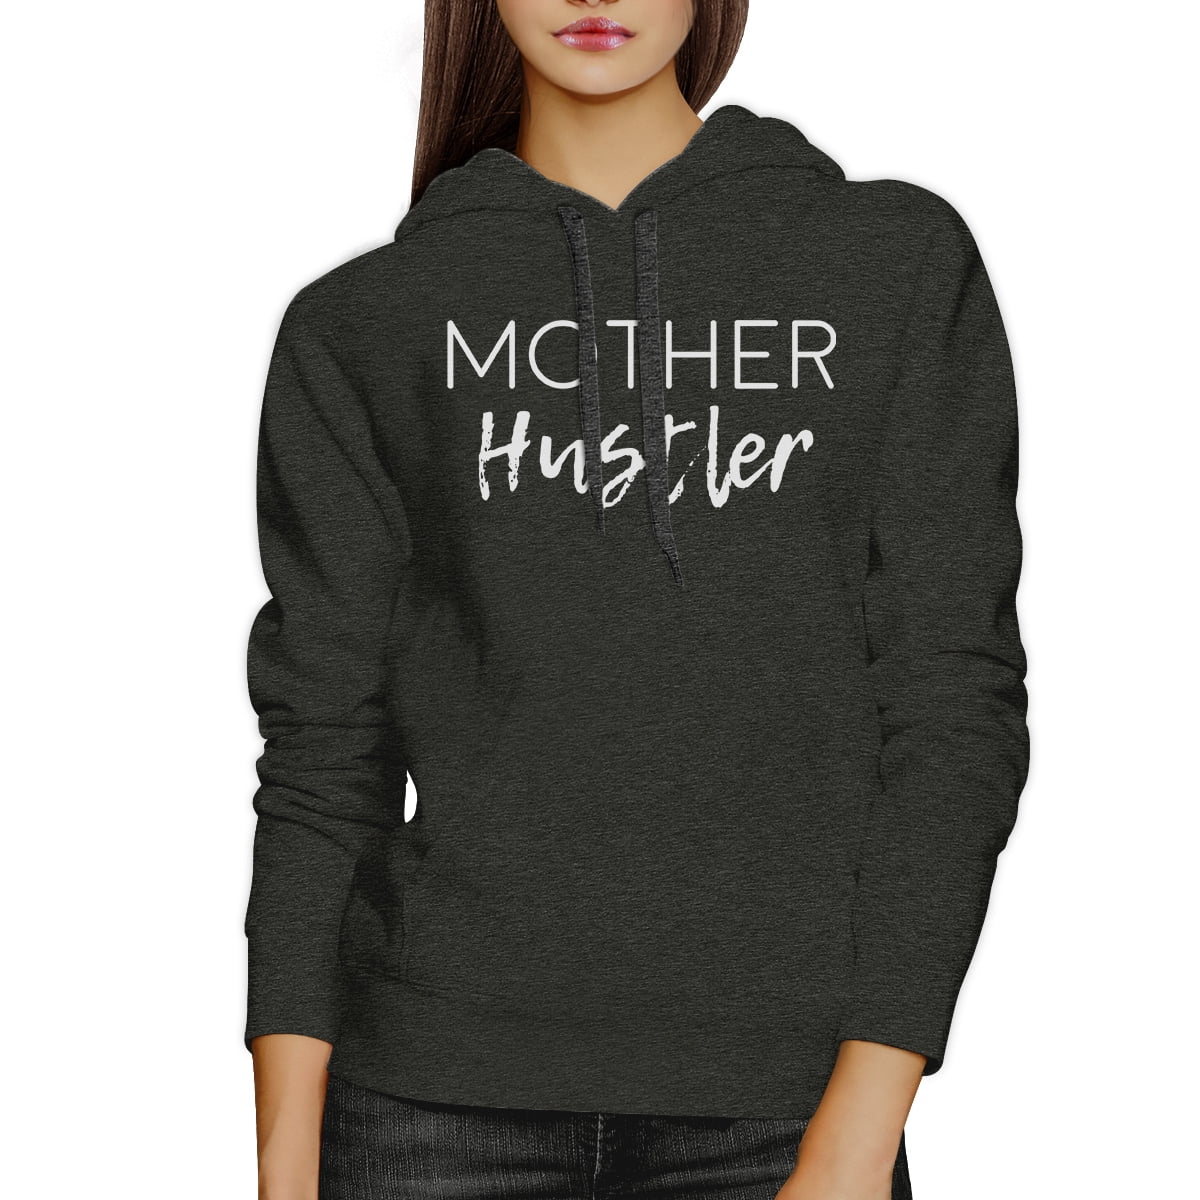 Mother Hustler Charcoal Grey Unisex Hoodie for Mothers